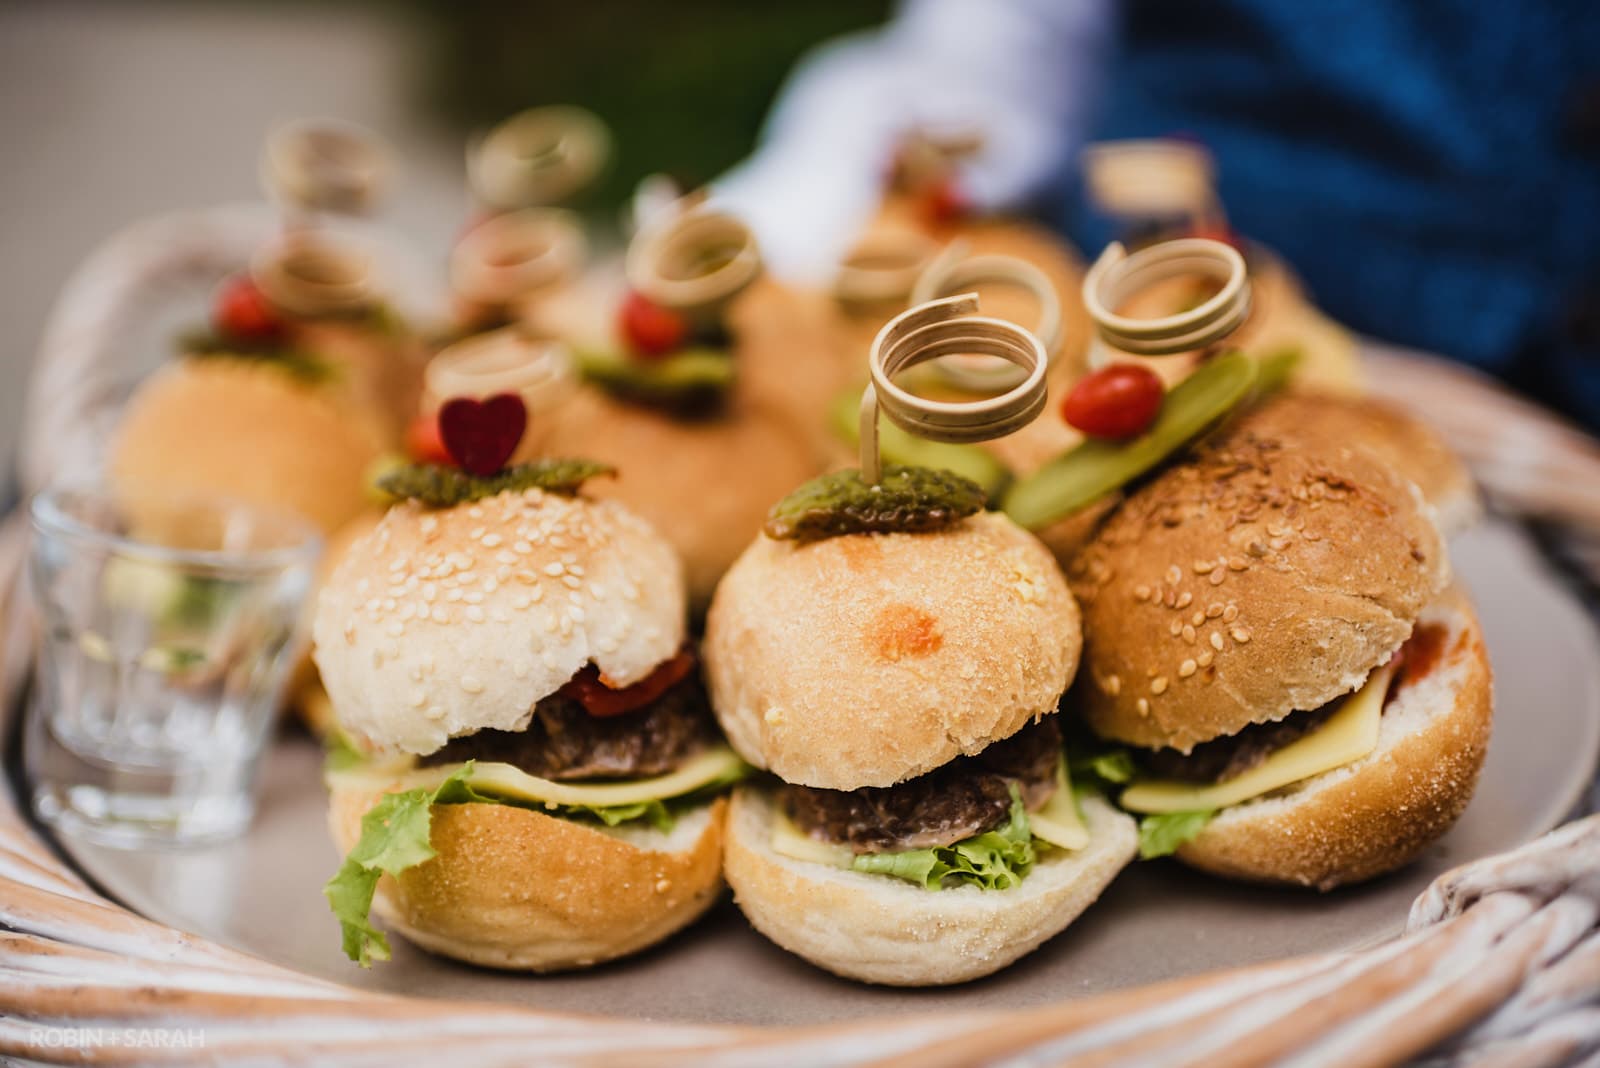 Miniature burgers served during wedding canapes